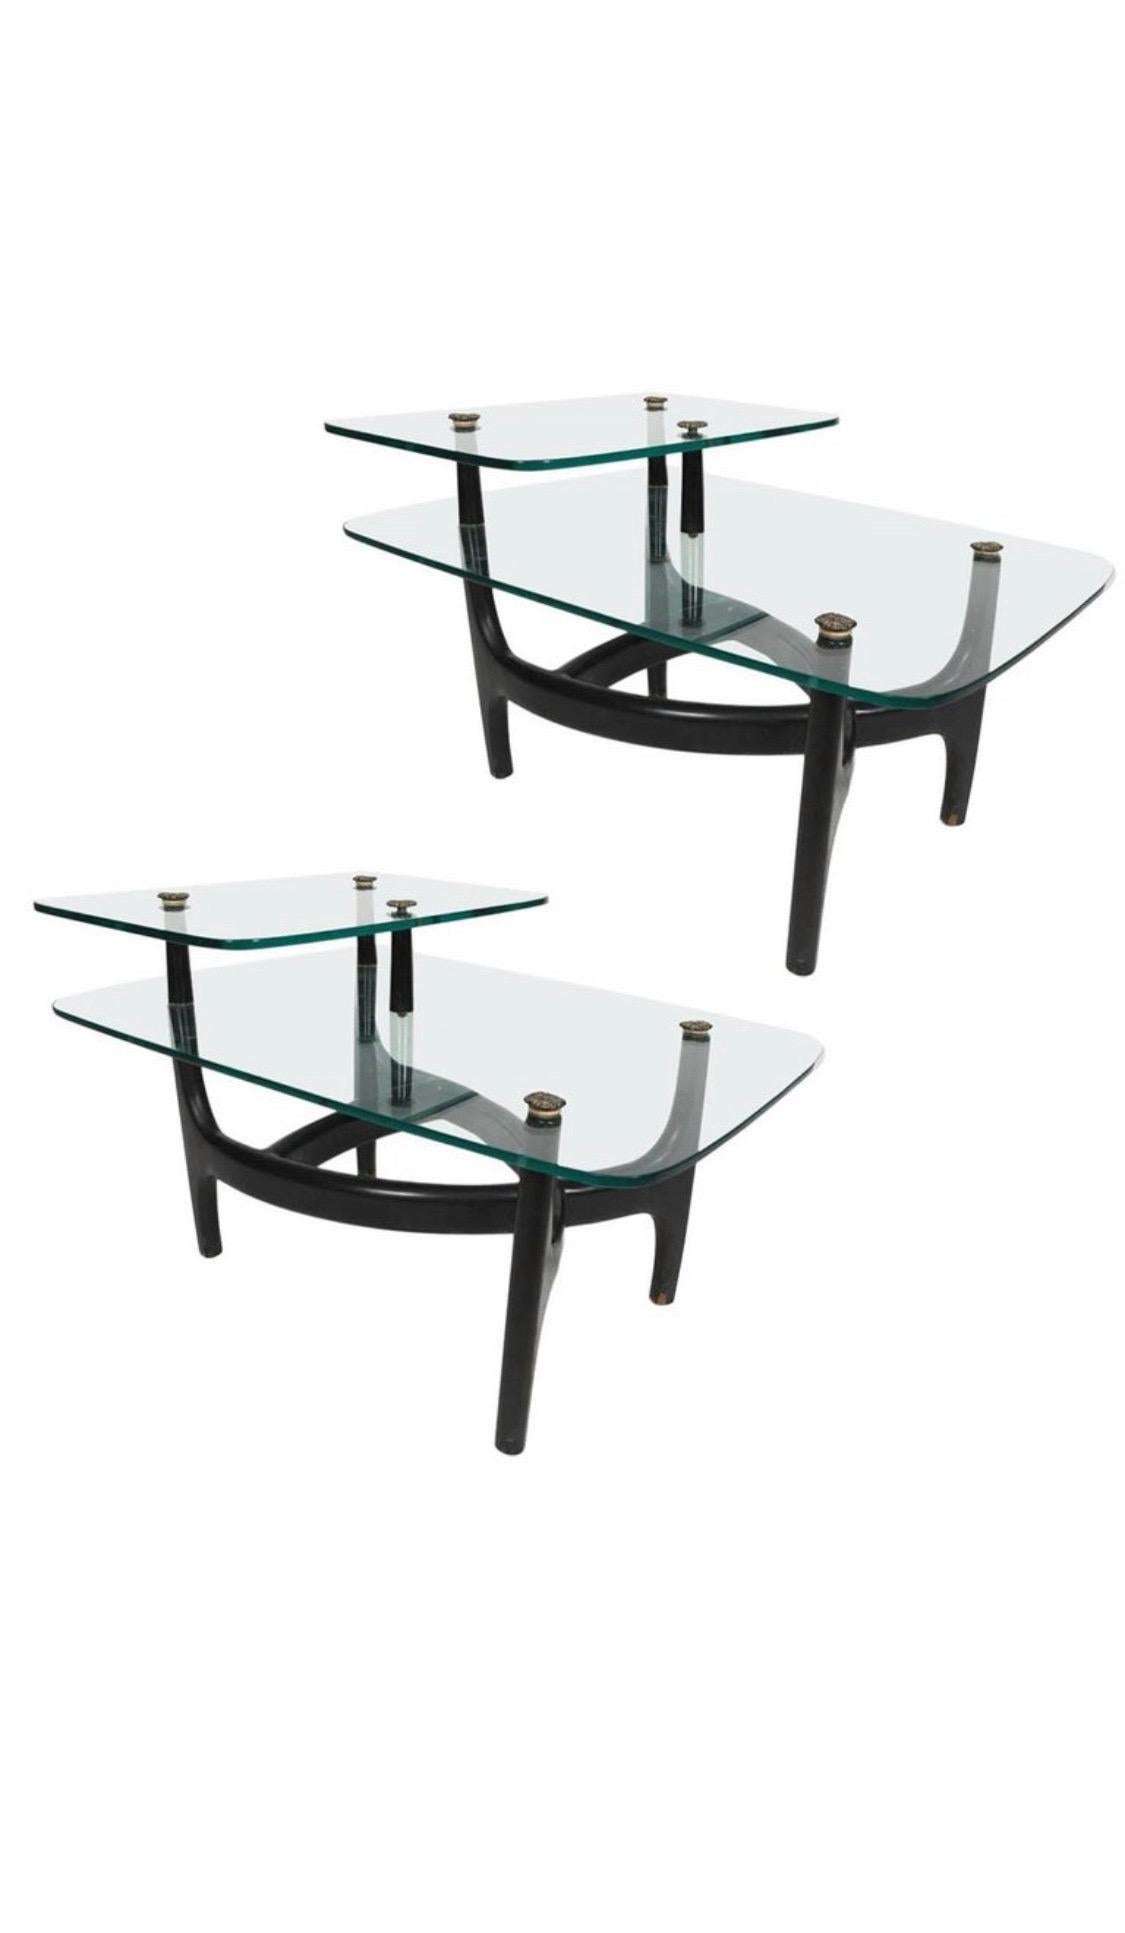 An elegant pair of MCM Side Tables handcrafted of ebonised hardwood. The two-tier design is clearly inspired by Vladimir Kagan and Adrian Pearsall. 
The biomorphic design is connected by Wooden columns.
The surface is original and has been